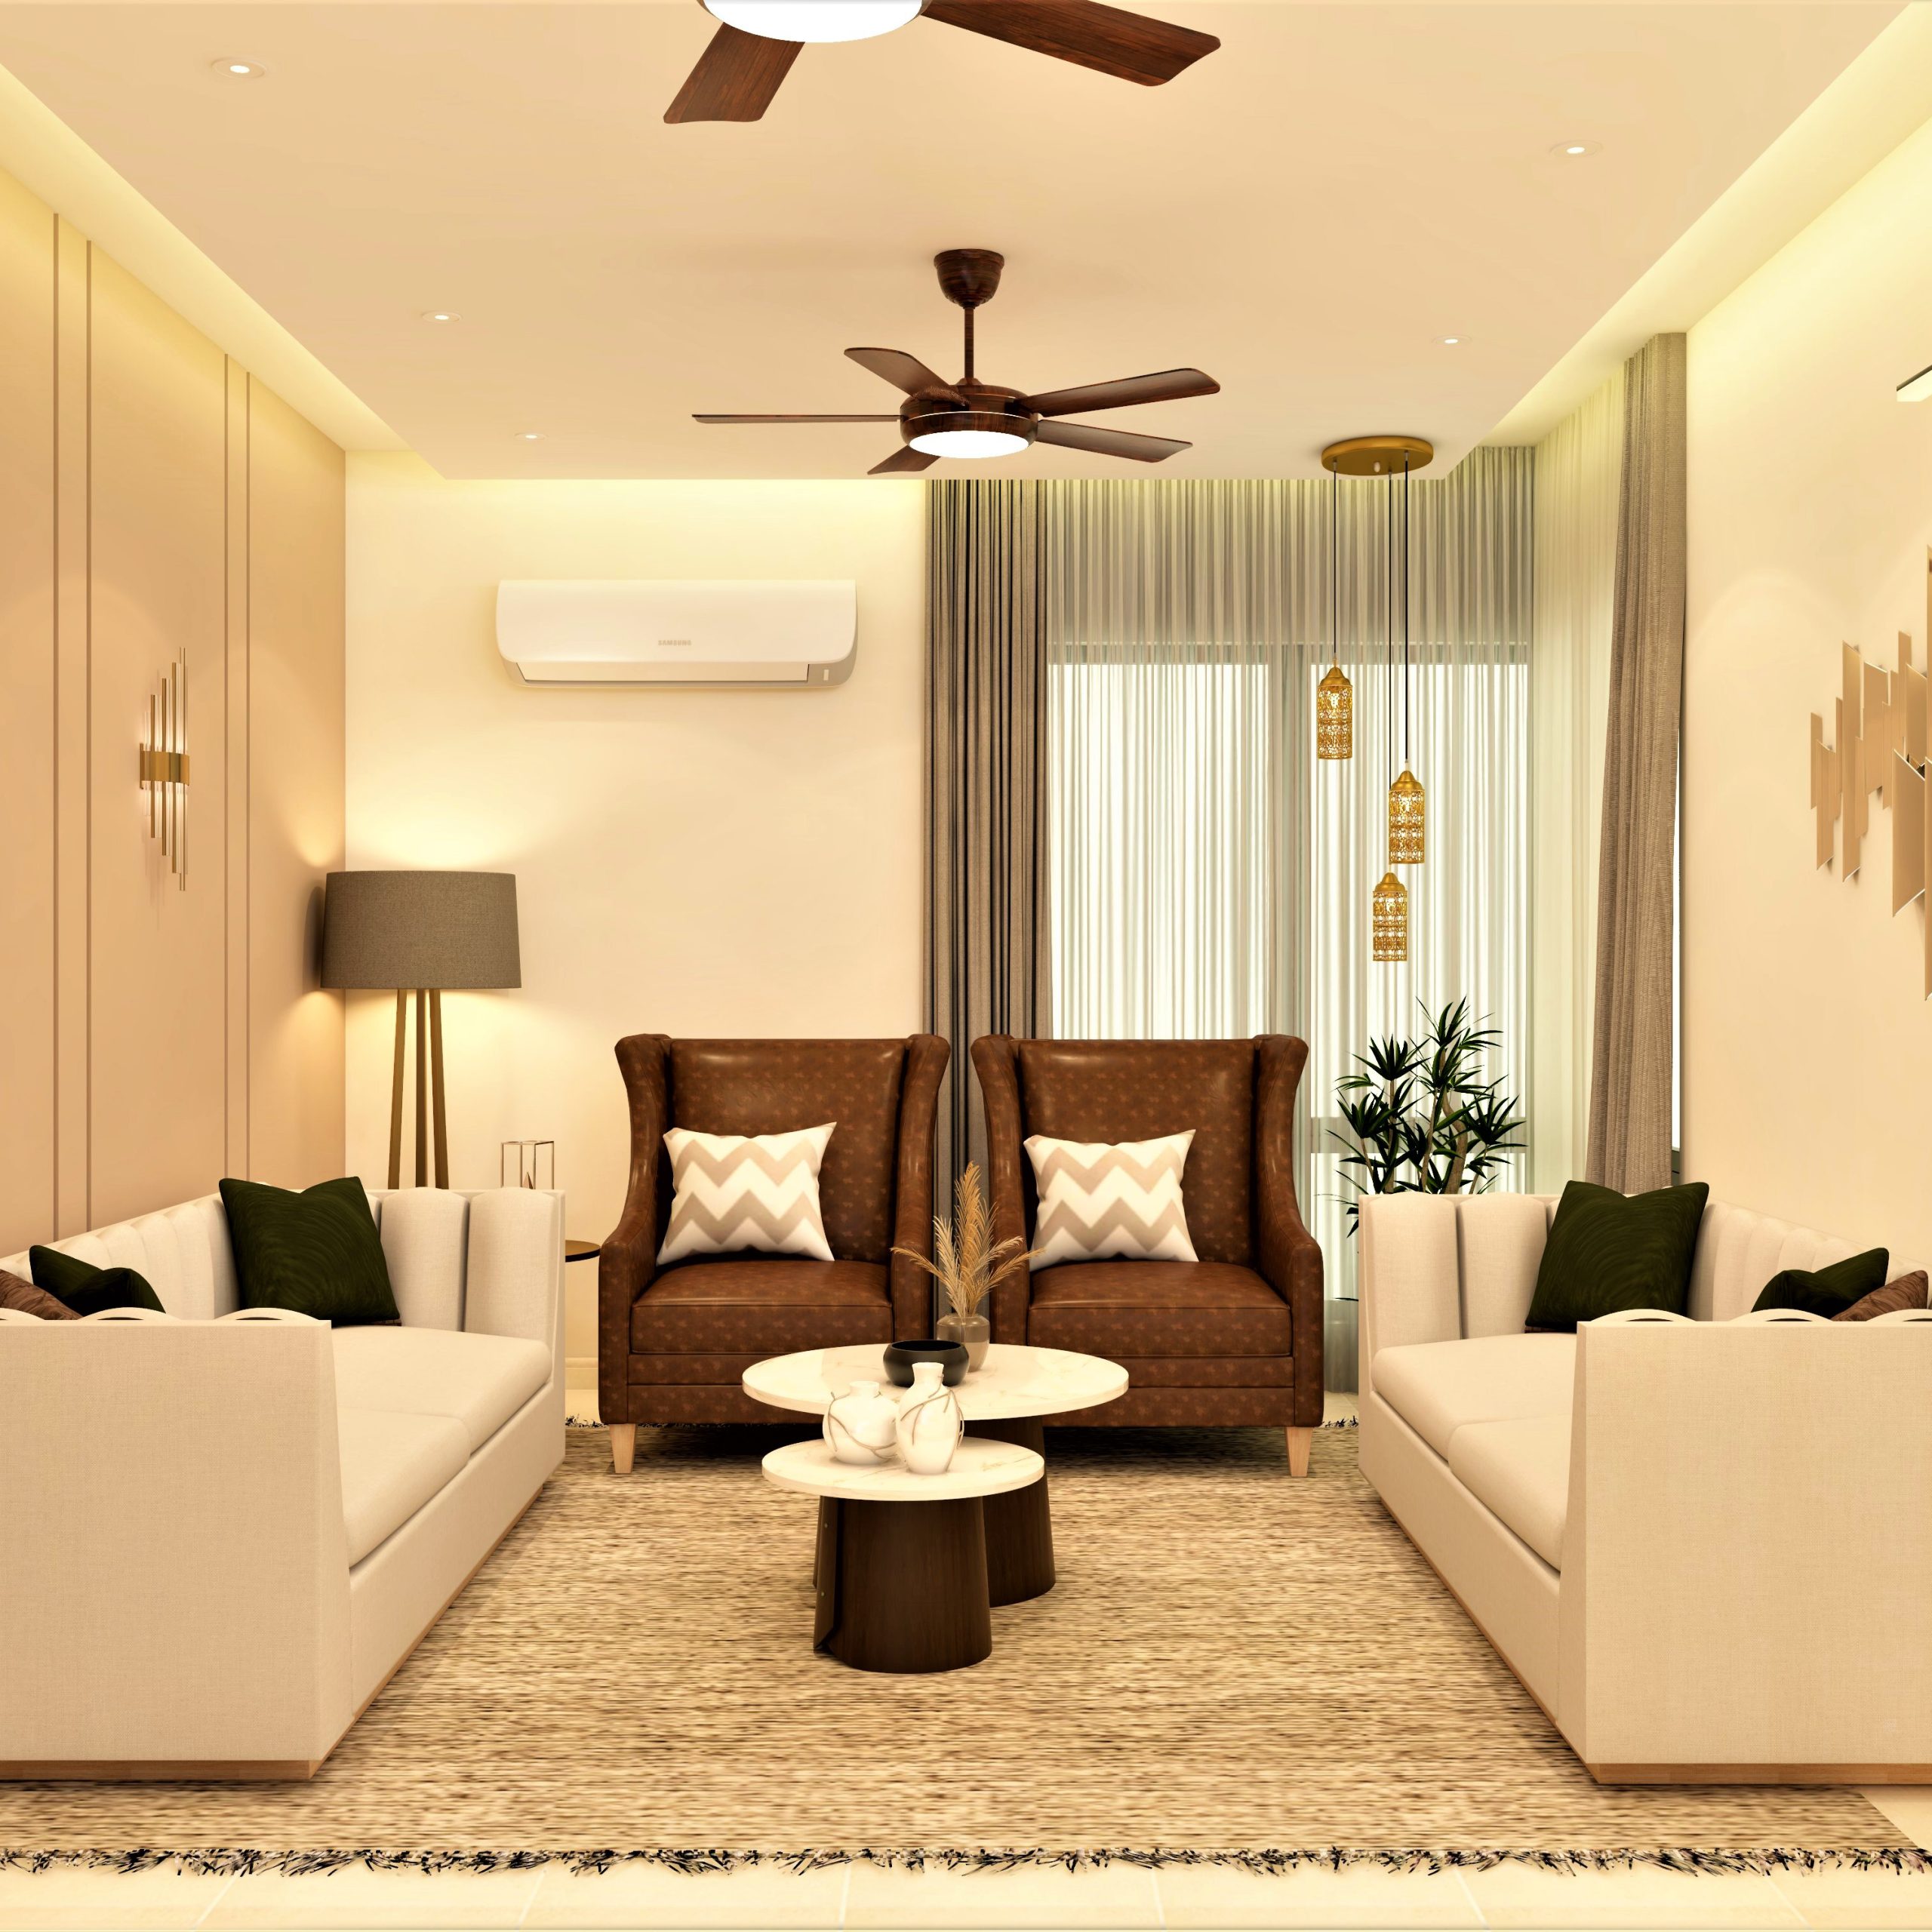 Upgrade Your Home with a Ceiling Fan with Light